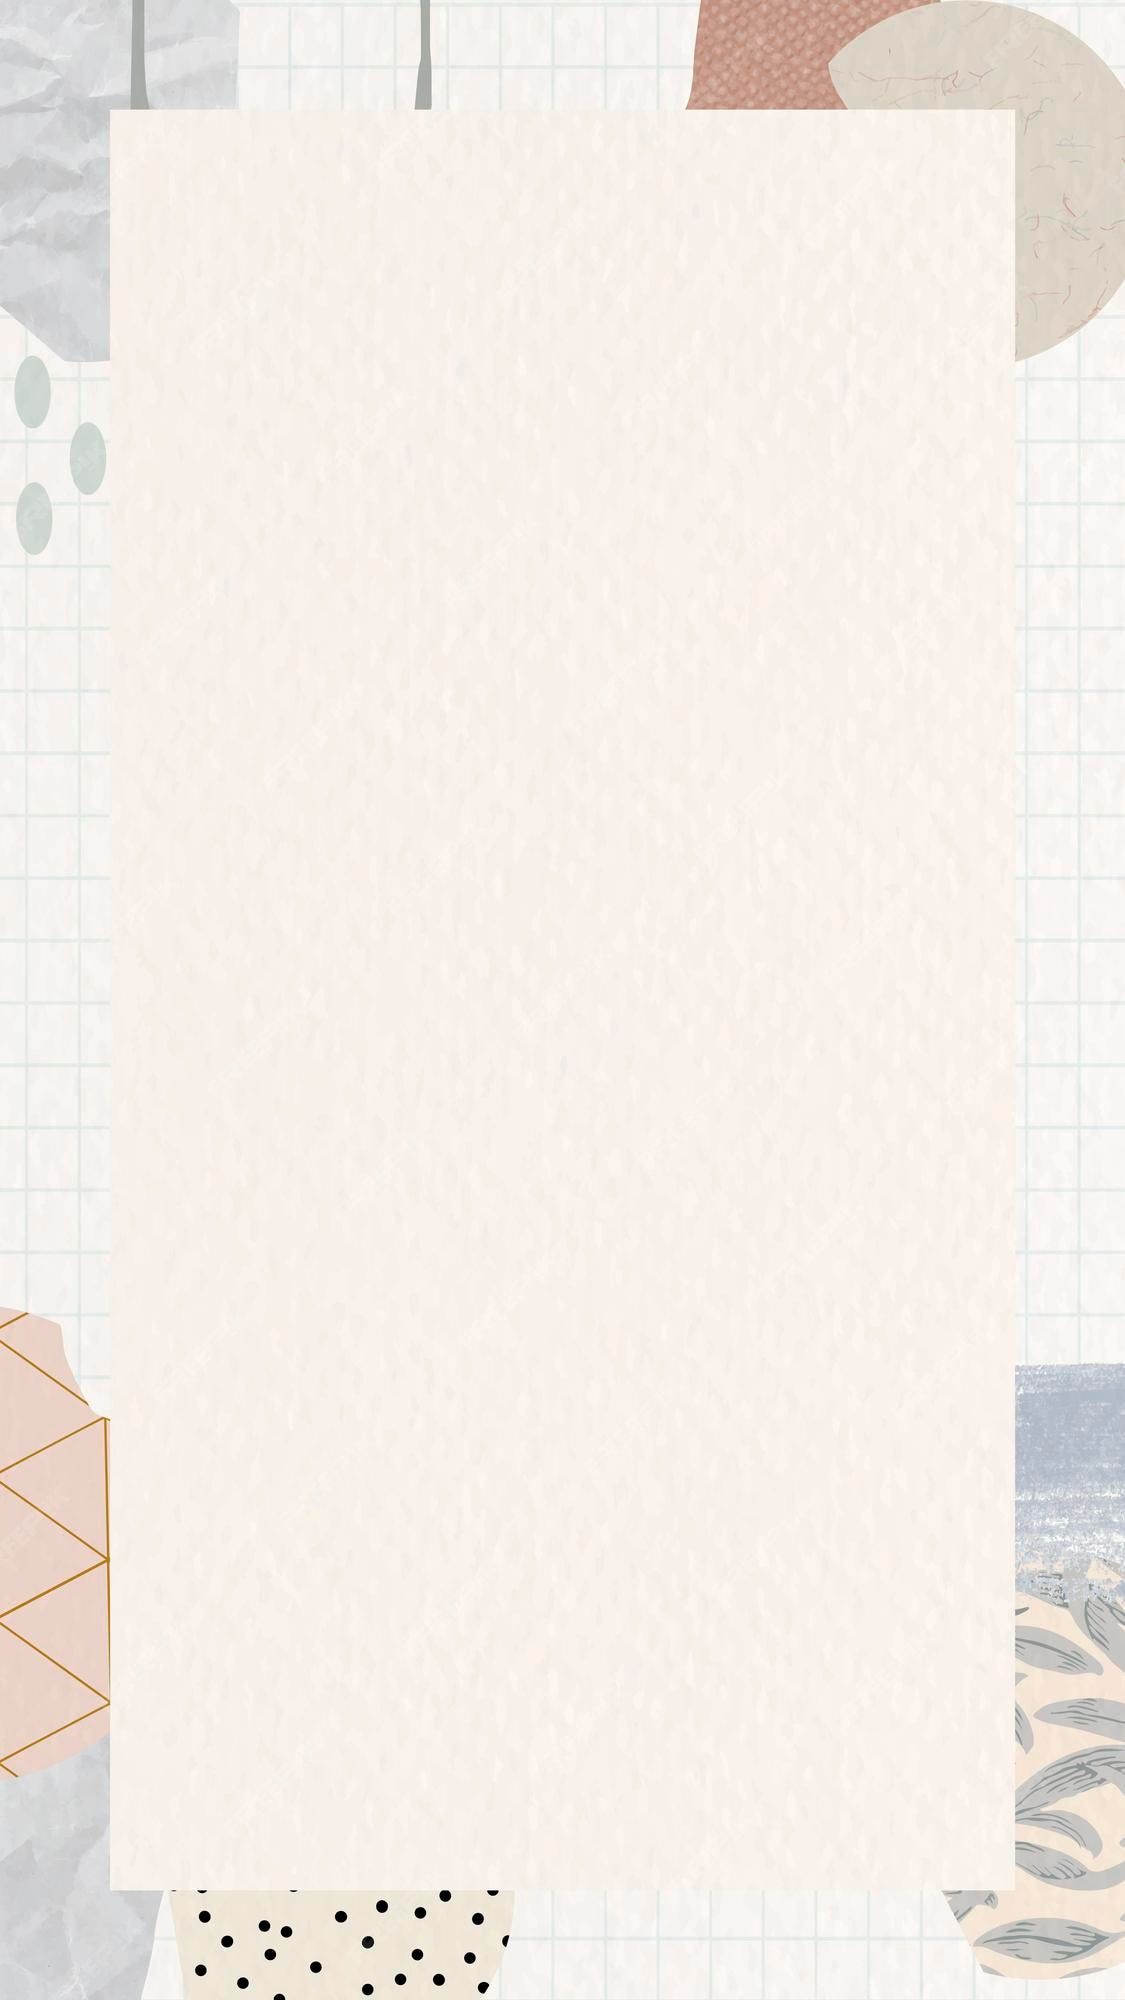 A4 paper background with a grid pattern - Terrazzo, border